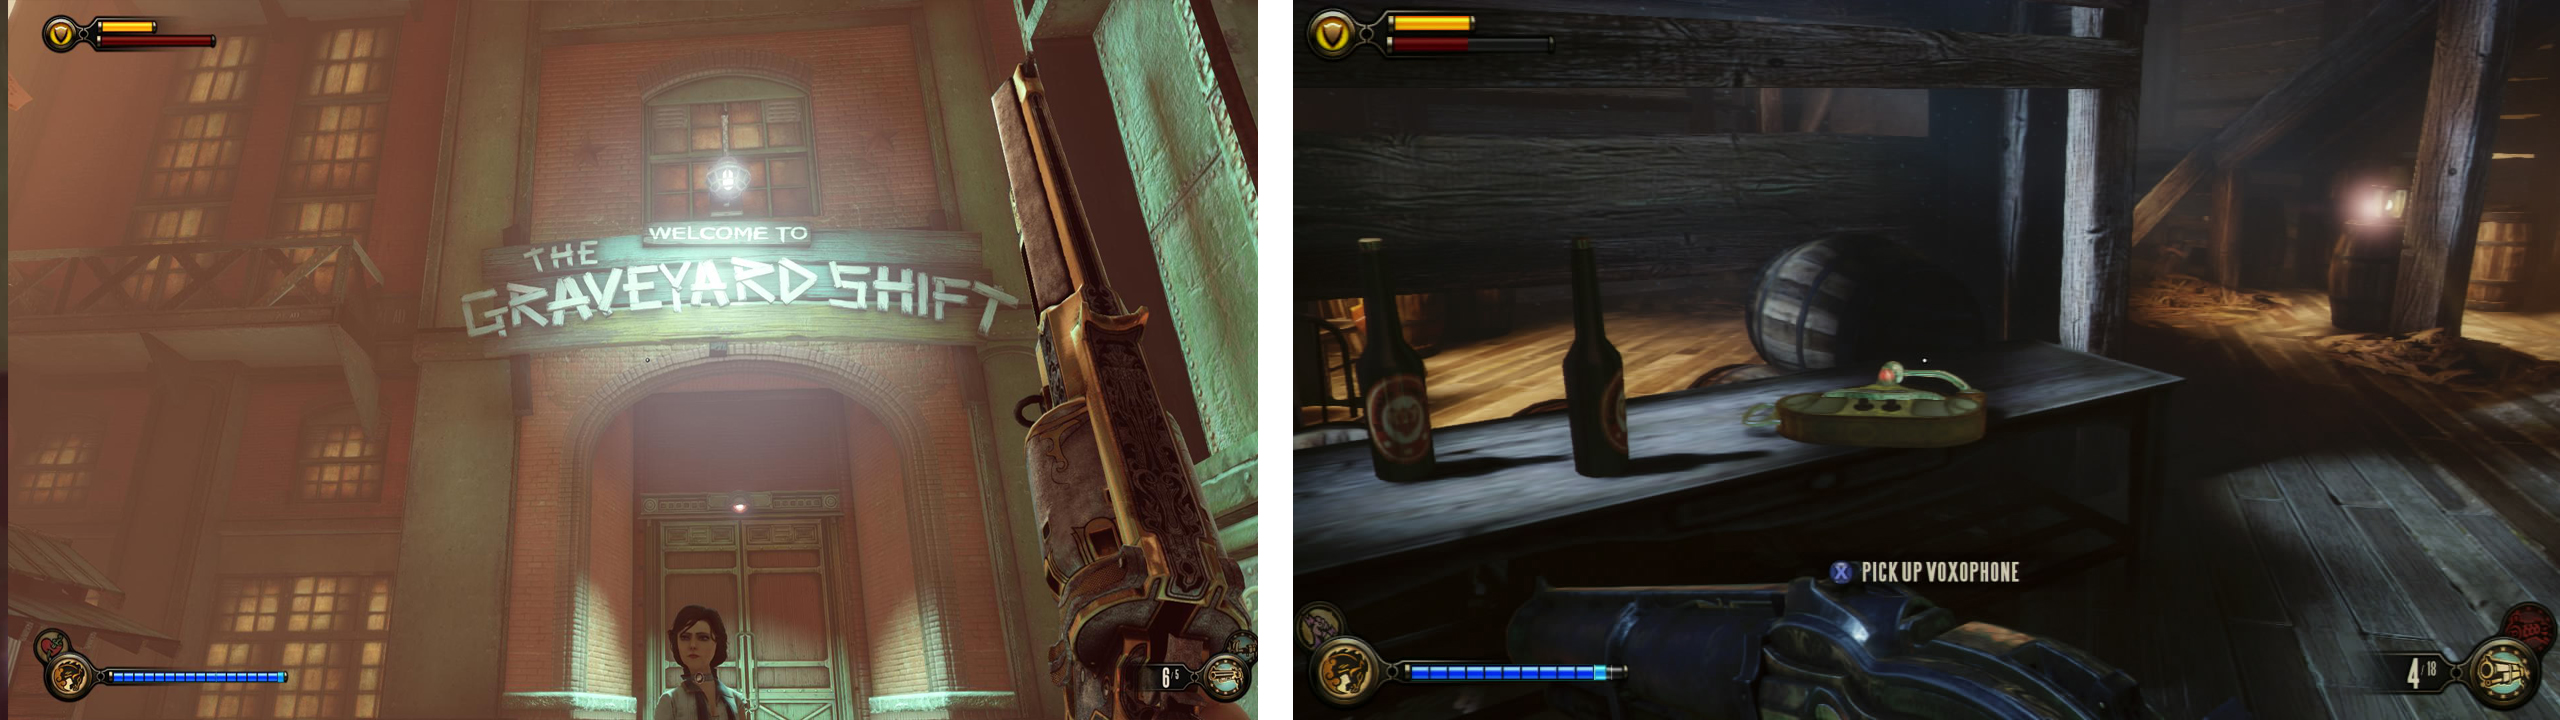 Enter the Graveyard Shift Bar (left). In the basement you’ll find a set of Keys for an optional task and a Voxophone (right).